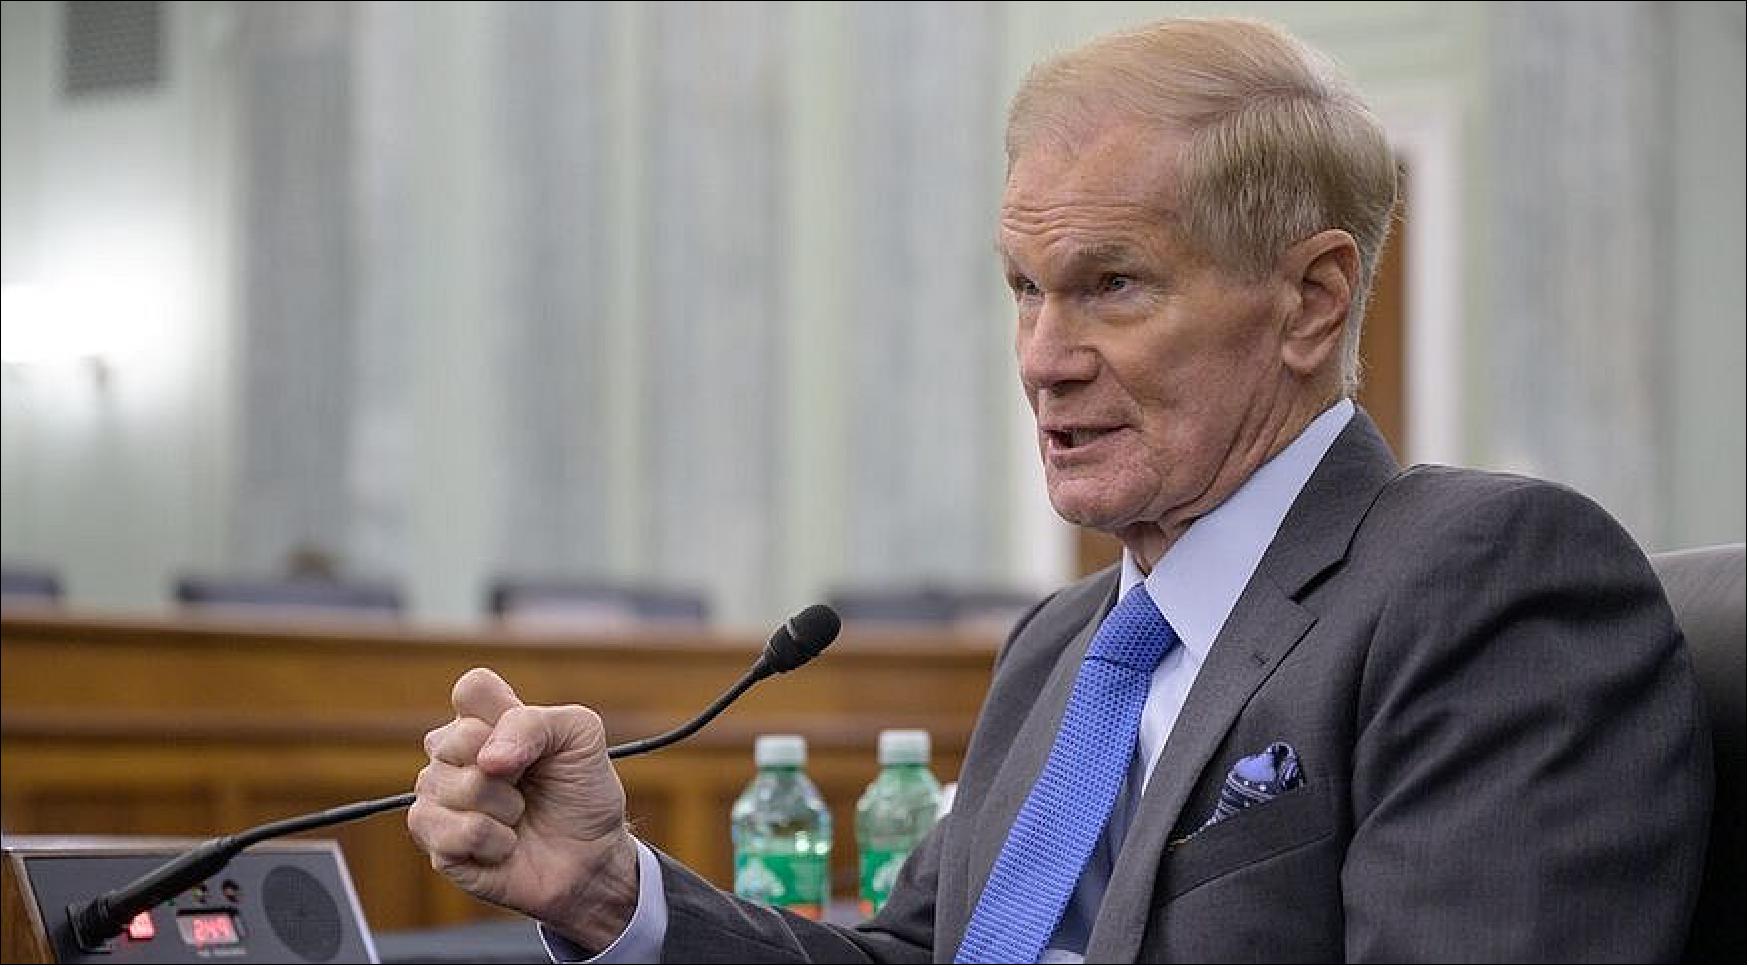 Figure 1: The full Senate confirmed Bill Nelson unanimously to be NASA administrator, just eight days after his confirmation hearing (photo credit: NASA/Bill Ingalls)